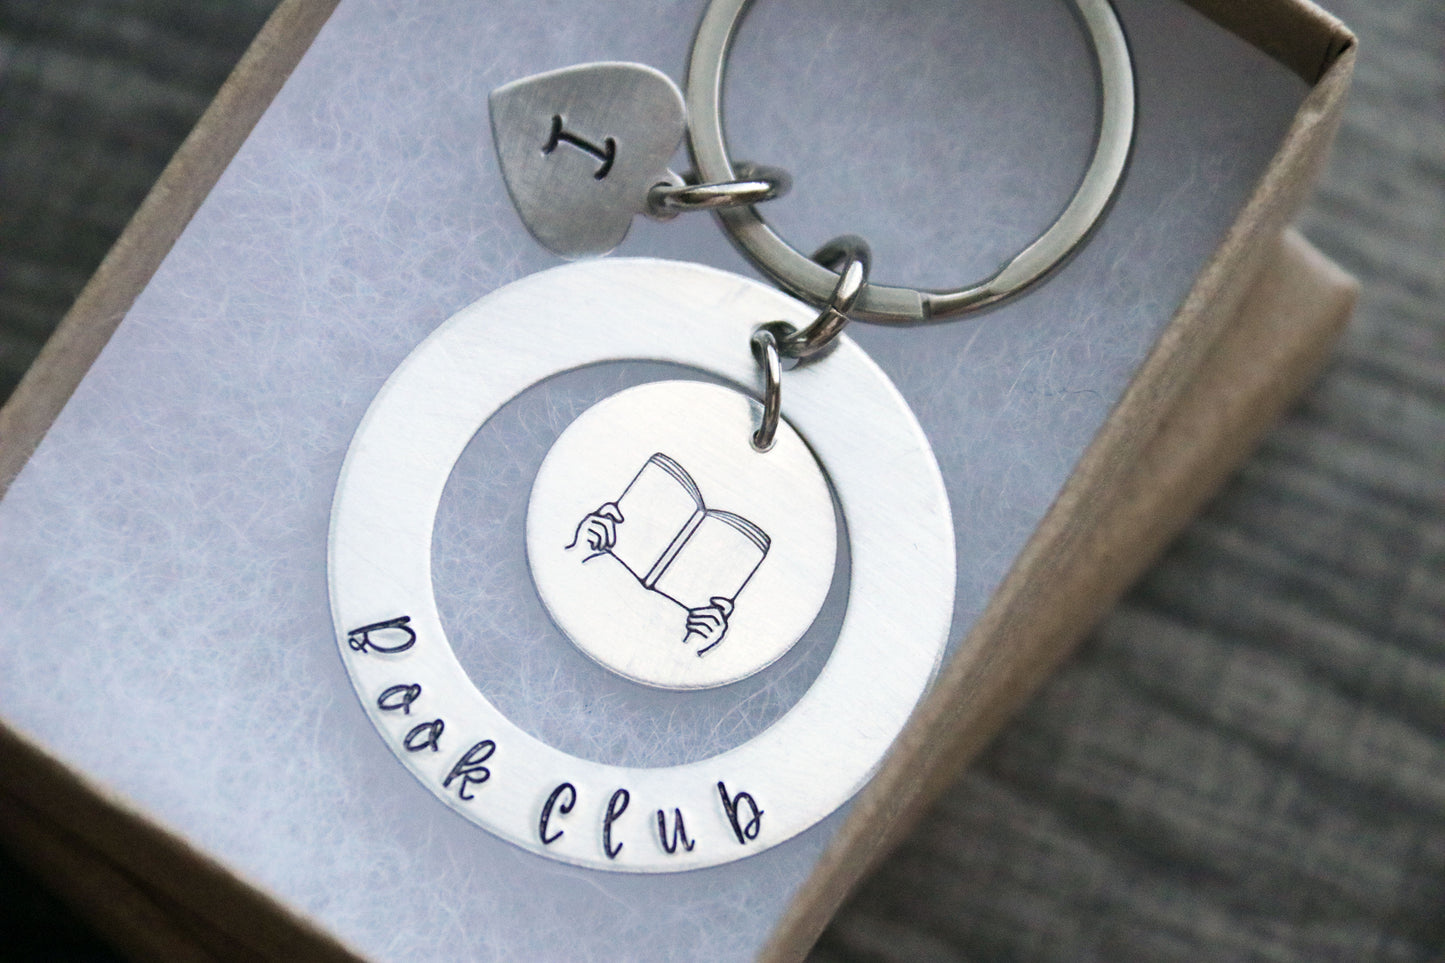 Book Club Keychain, Personalized Gift, Hand Stamped